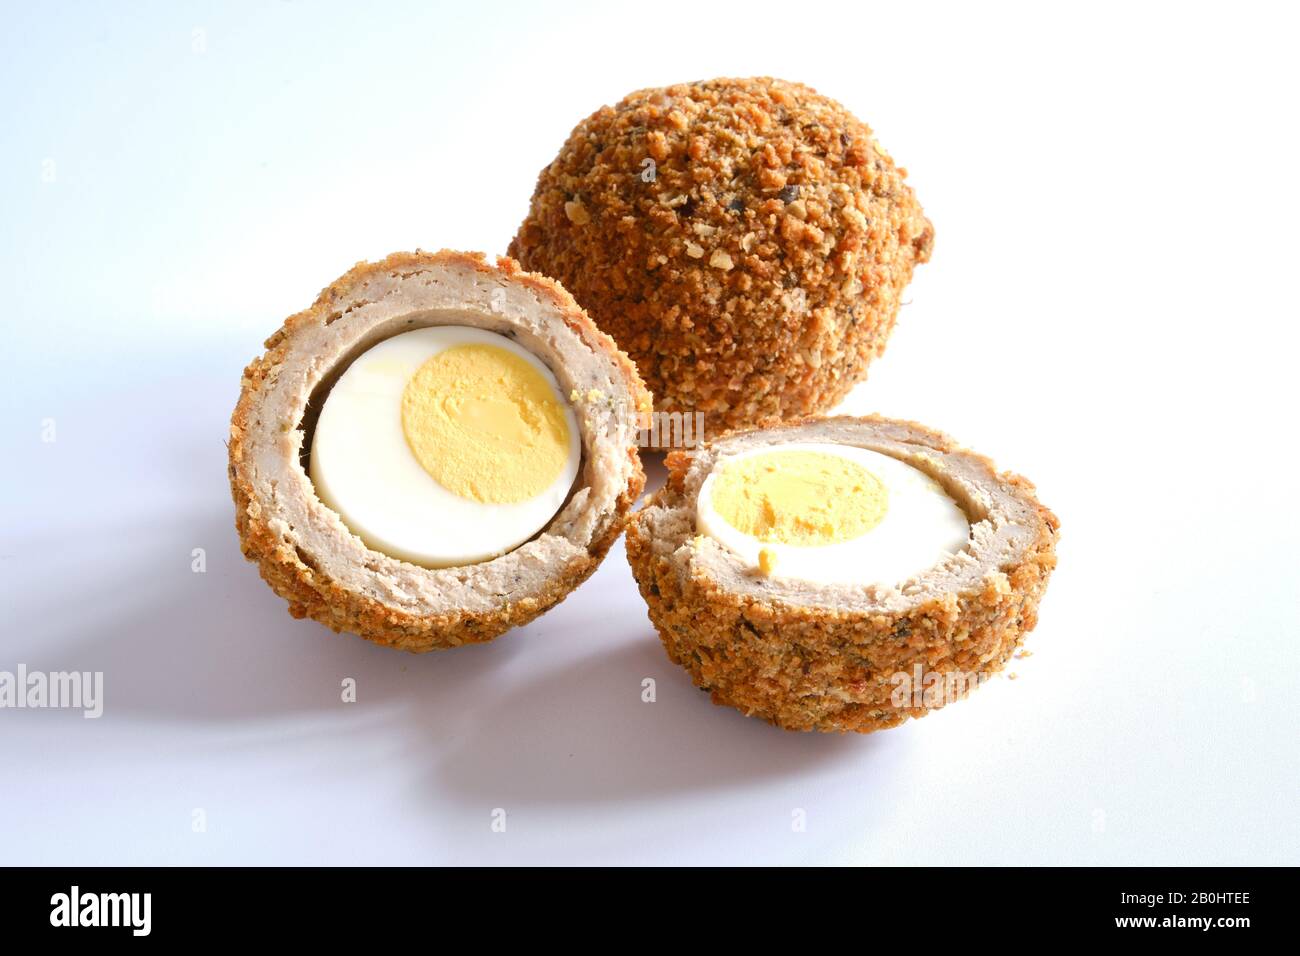 Scotch eggs a traditional savoury snack consisting of a hard boiled egg surrounded by sausage meat and bread crumbs white background Stock Photo